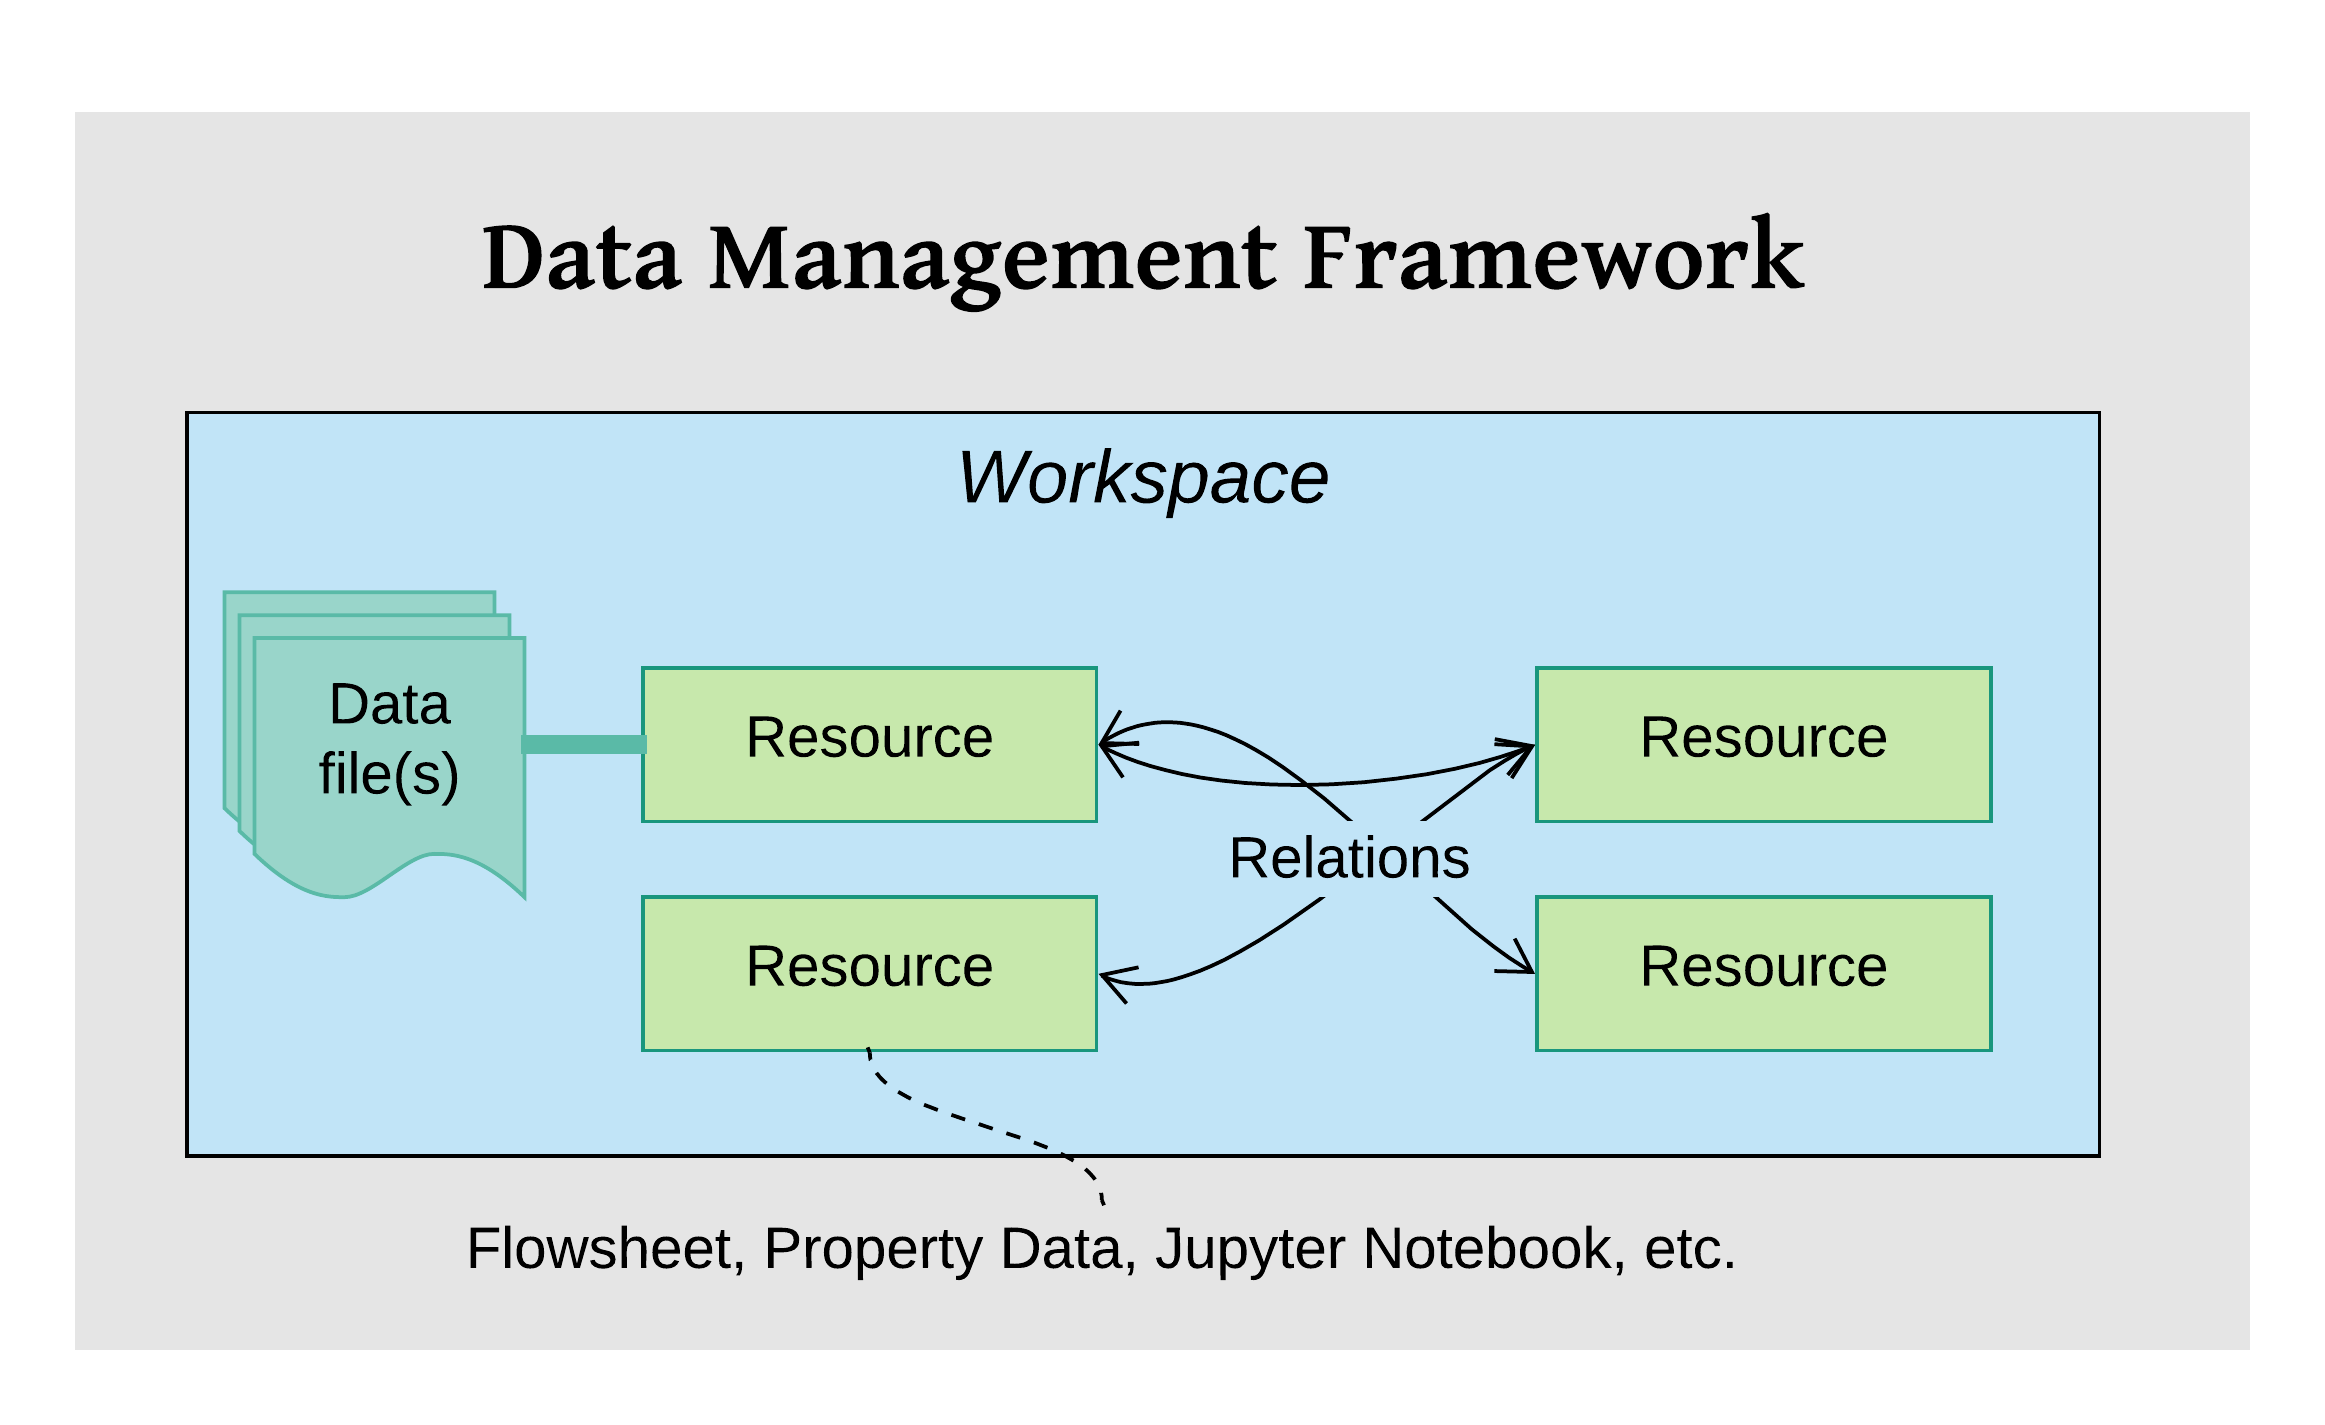 ../_images/dmf-workspace-resource.png